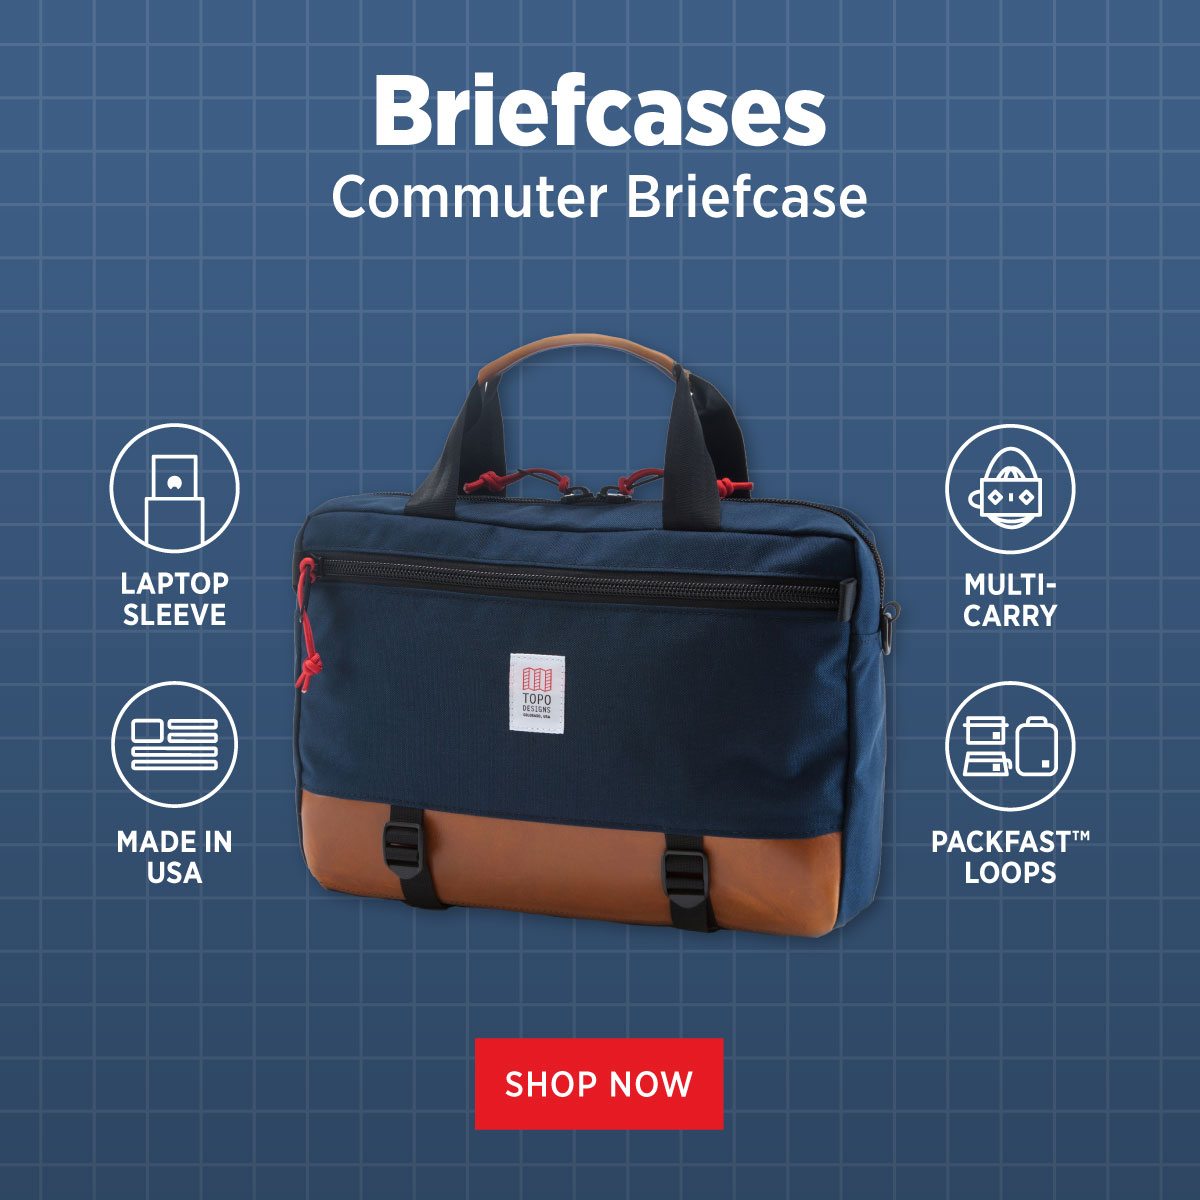 BRIEFCASES - COMMUTER BRIEFCASE IN NAVY/BROWN LEATHER